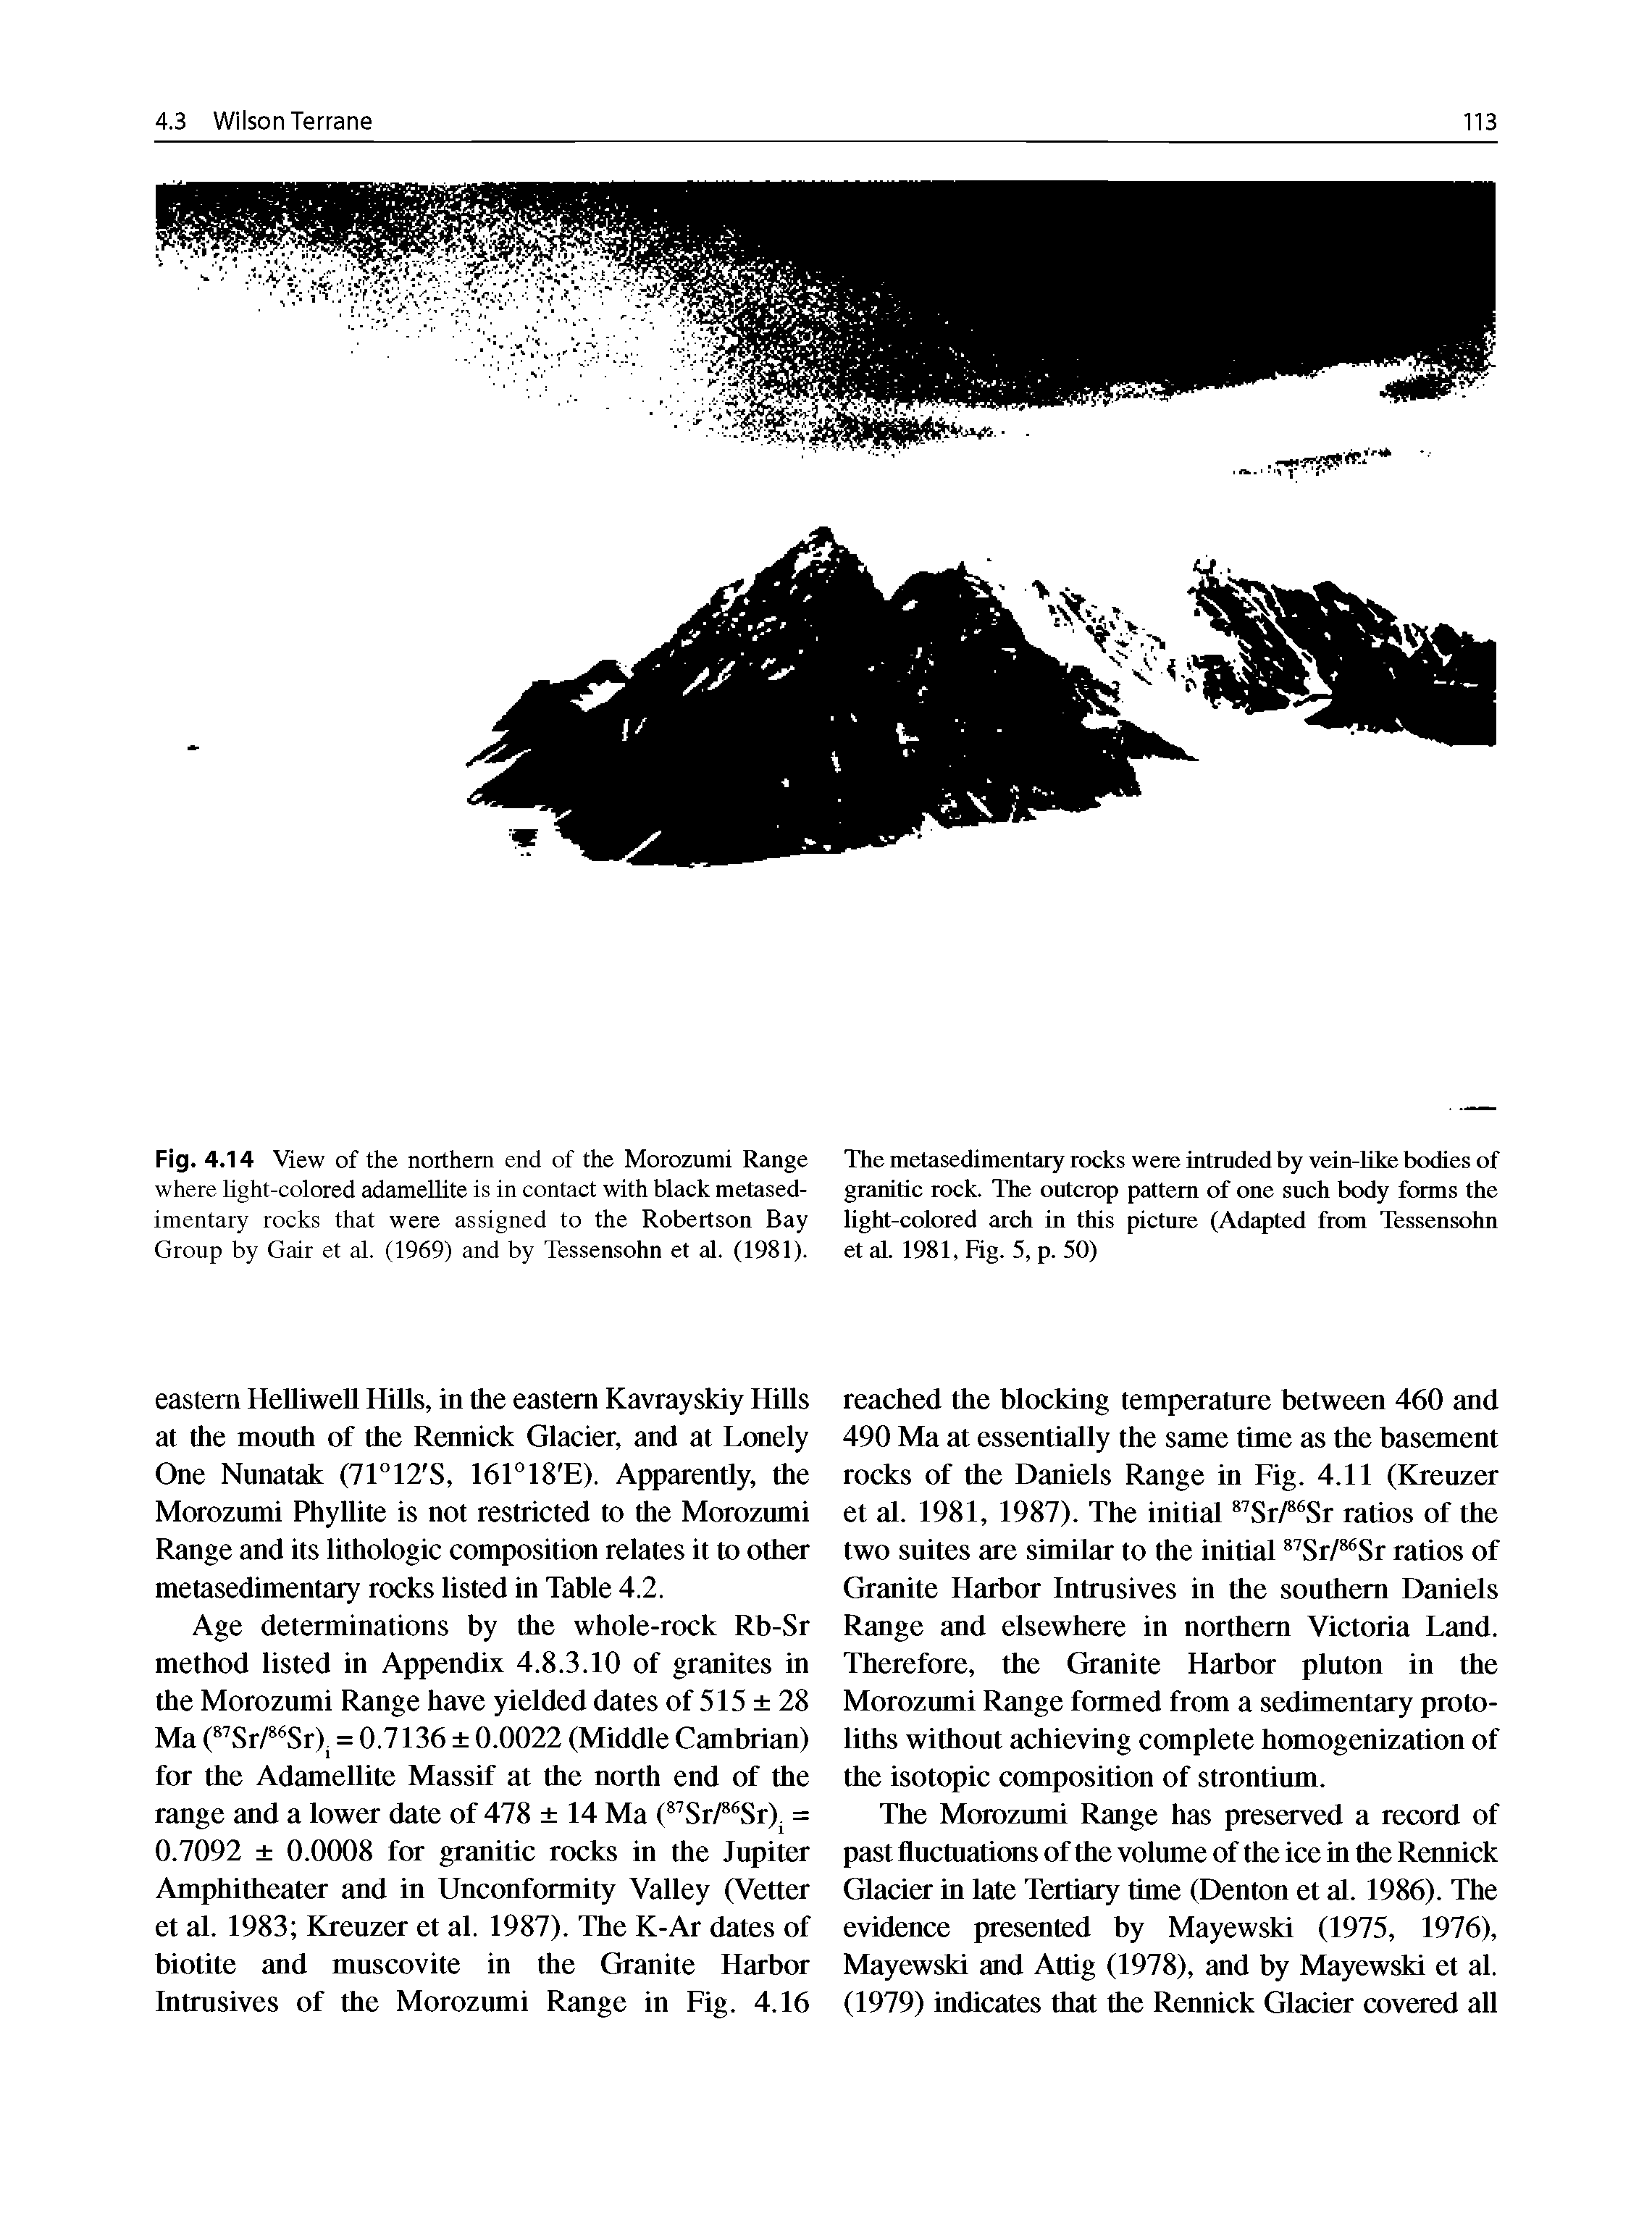 Fig. 4.14 View of the northern end of the Morozumi Range where light-colored adamellite is in contact with black metased-imentary rocks that were assigned to the Robertson Bay Group by Gair et al. (1969) and by Tessensohn et al. (1981).